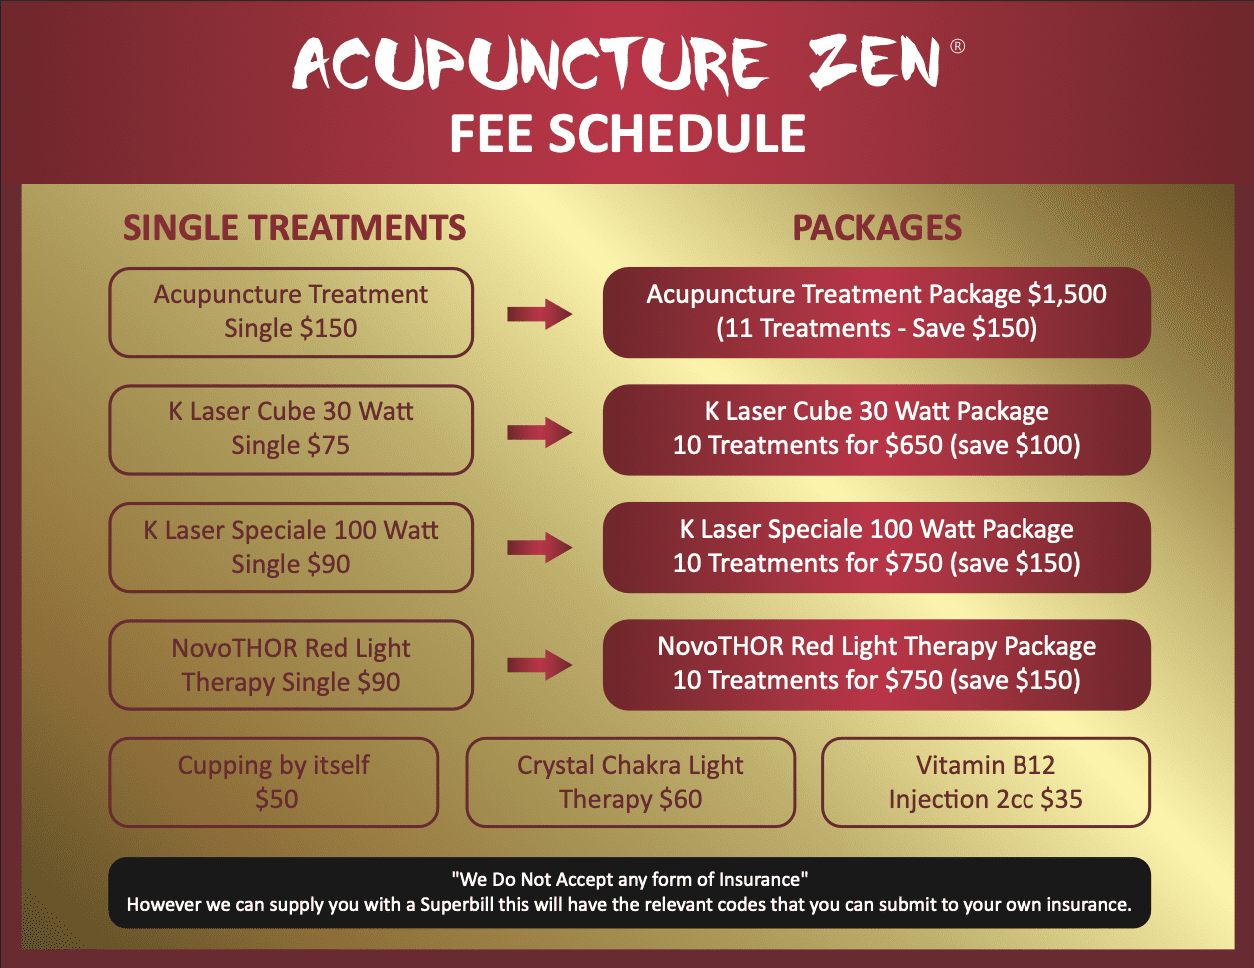 Fee Schedule | Dr. Tony Willcox D.O.M., A.P. | 561-274-4447 